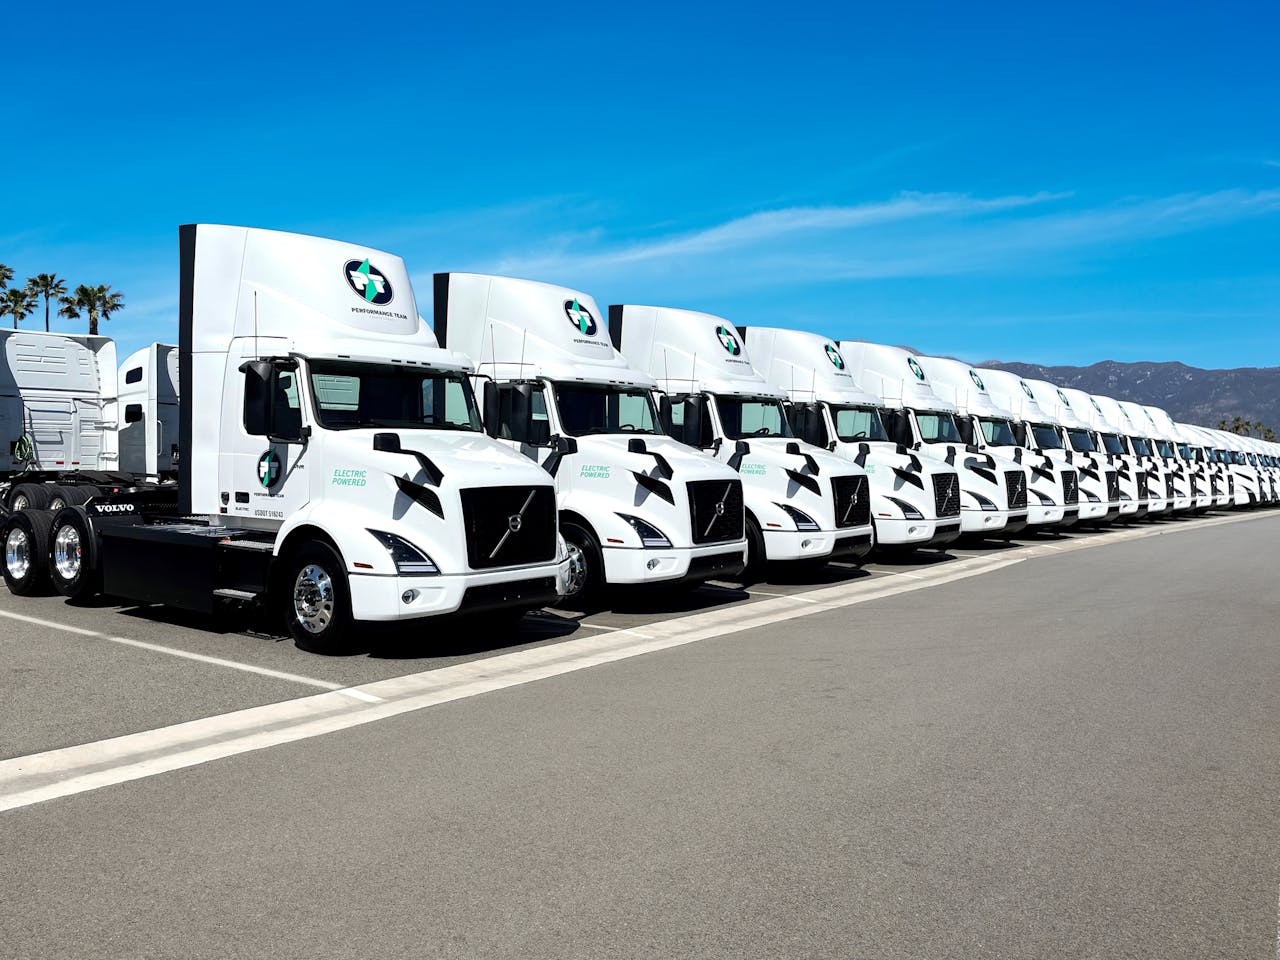 Volvo Trucks North America has received its largest global order of Class 8 electric trucks to date with Performance Team – A Maersk Company, making a total commitment to purchase 126 Volvo VNR Electric trucks.